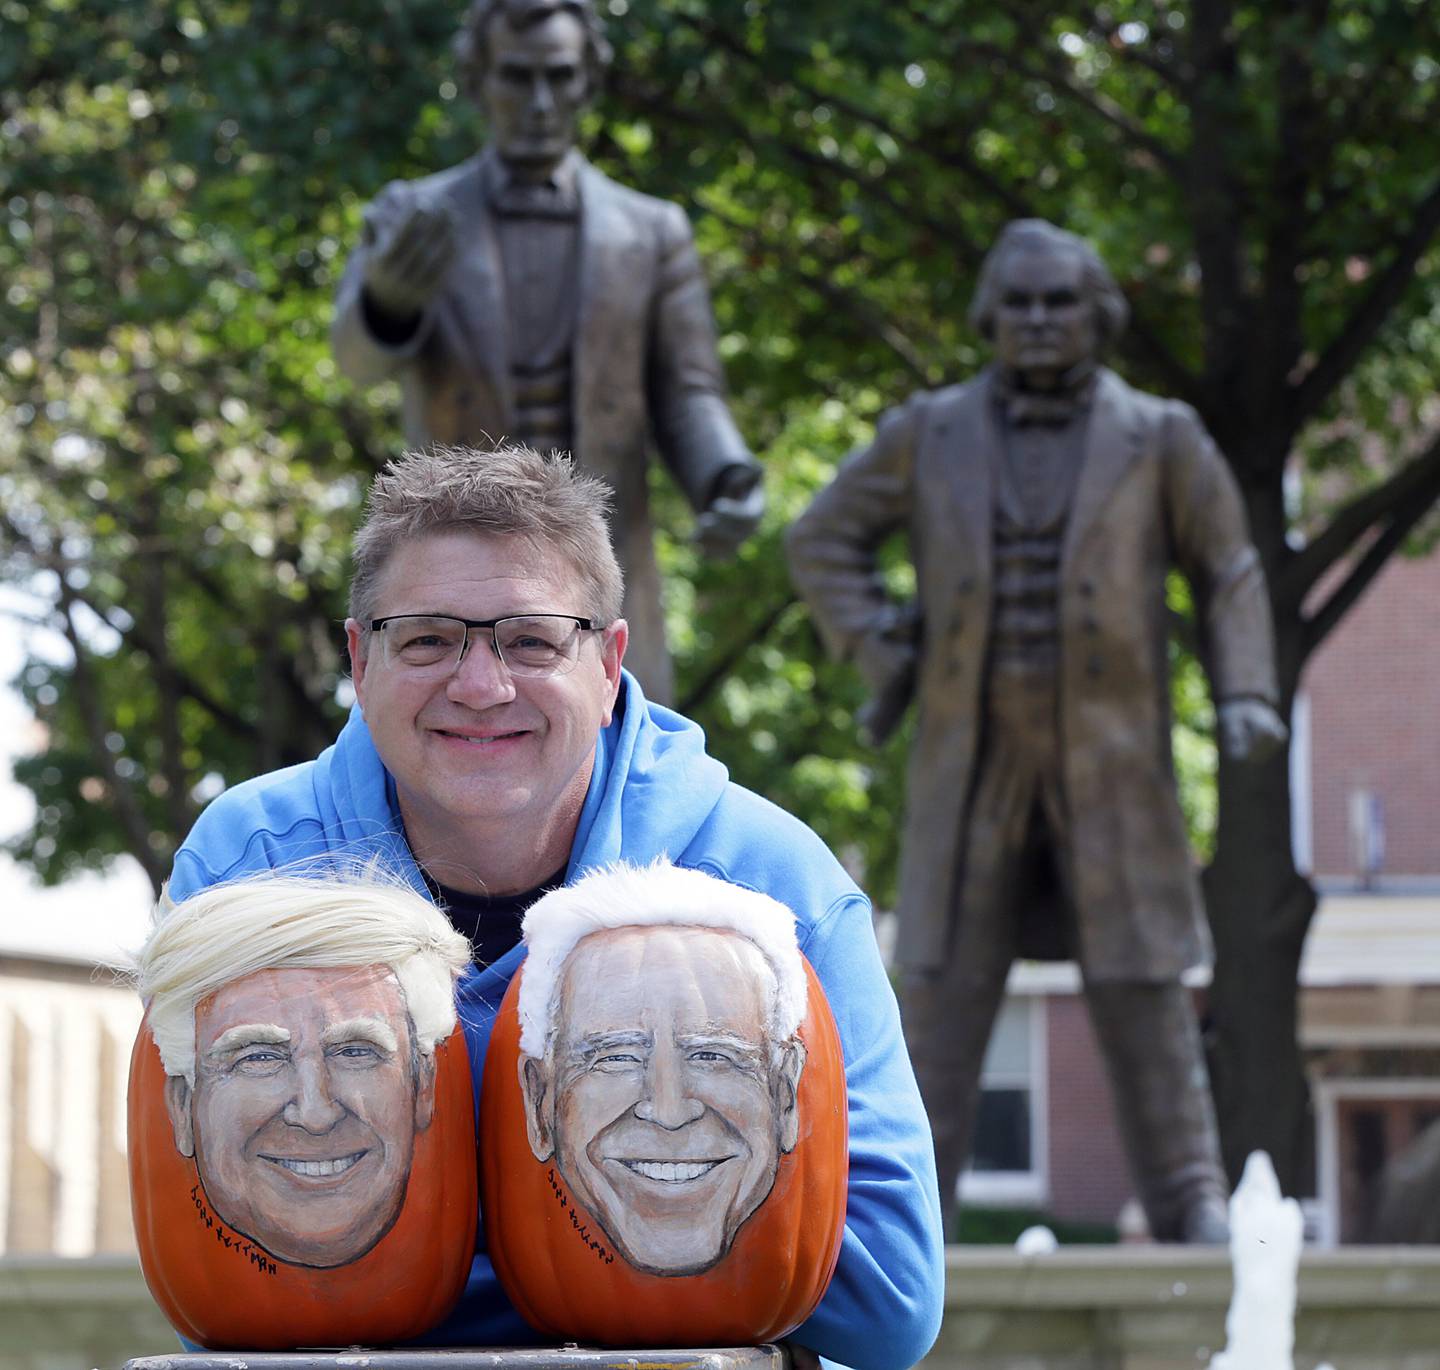 Artist John Kettman of La Salle, poses with his pumpkins of President Donald Trump and Democratic Presidential candidate Joe Biden at the Lincoln and Douglas memorial in Washington Square in Ottawa on September 17th. Kettman's previous pumpkins from the Presidential election in 2016 has gained him worldwide fame. Ruters and ABC's Today Show has featured his work. This election, he decided to paint pumpkins with both candidates showcasing his talent by painting fine details including hair, eyebrows, and facial representation.